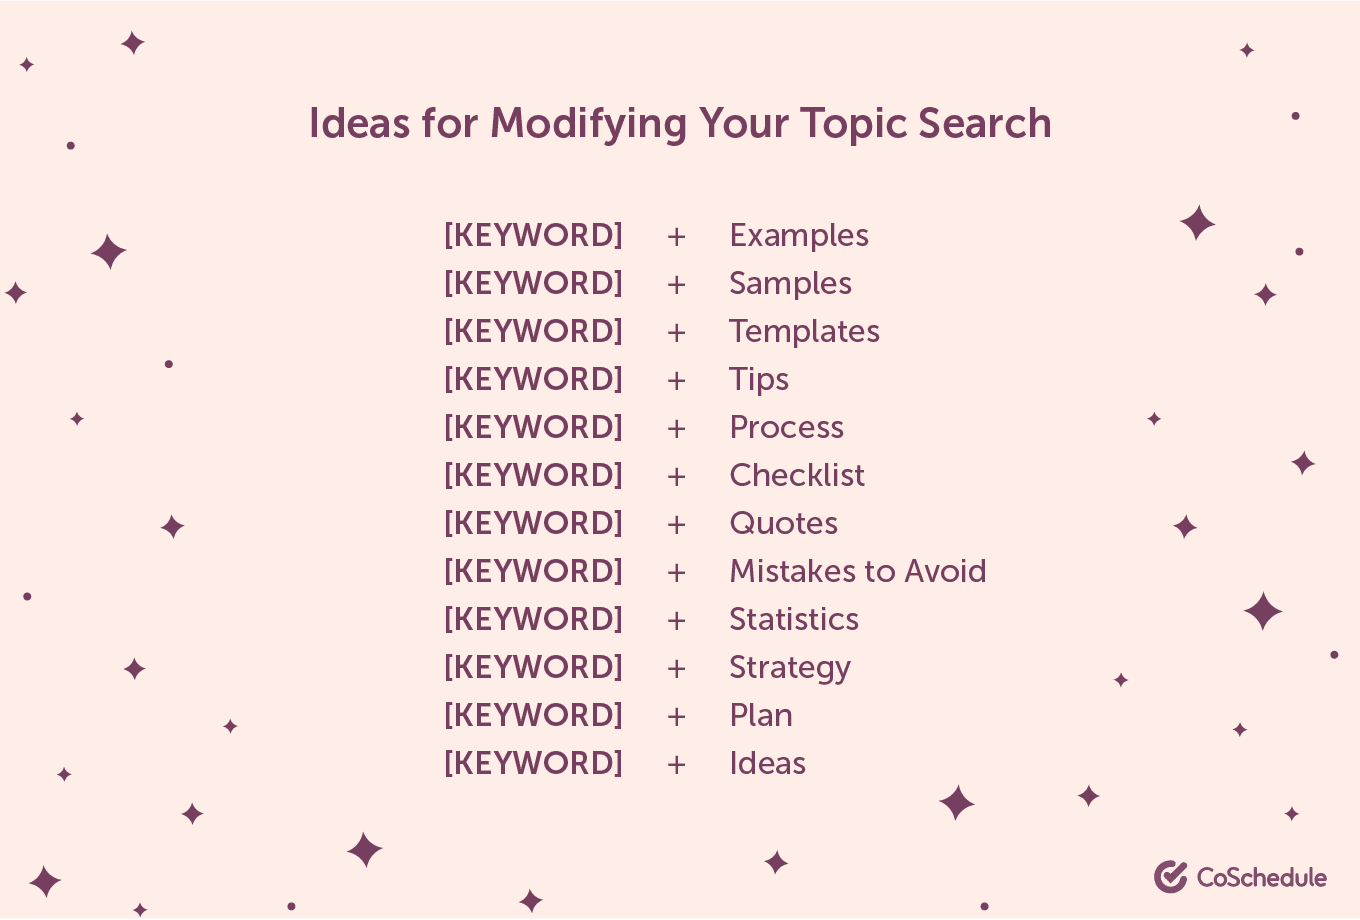 How to modify your topic search